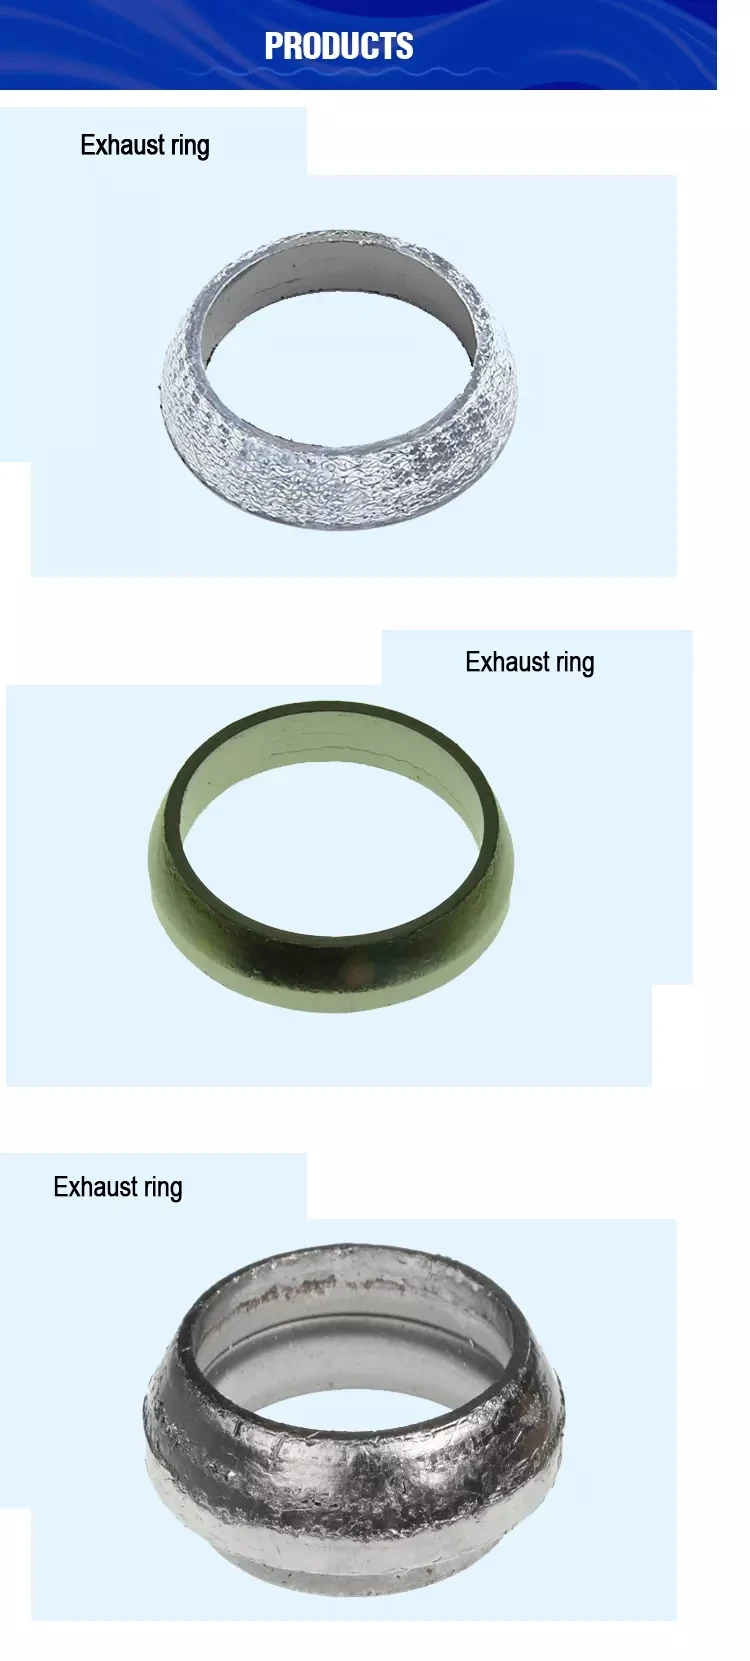 3 inch ball square muffler exhaust flange gasket buy flange gasket pn16 flange gasket pn16 exhaust gasket product on alibaba com